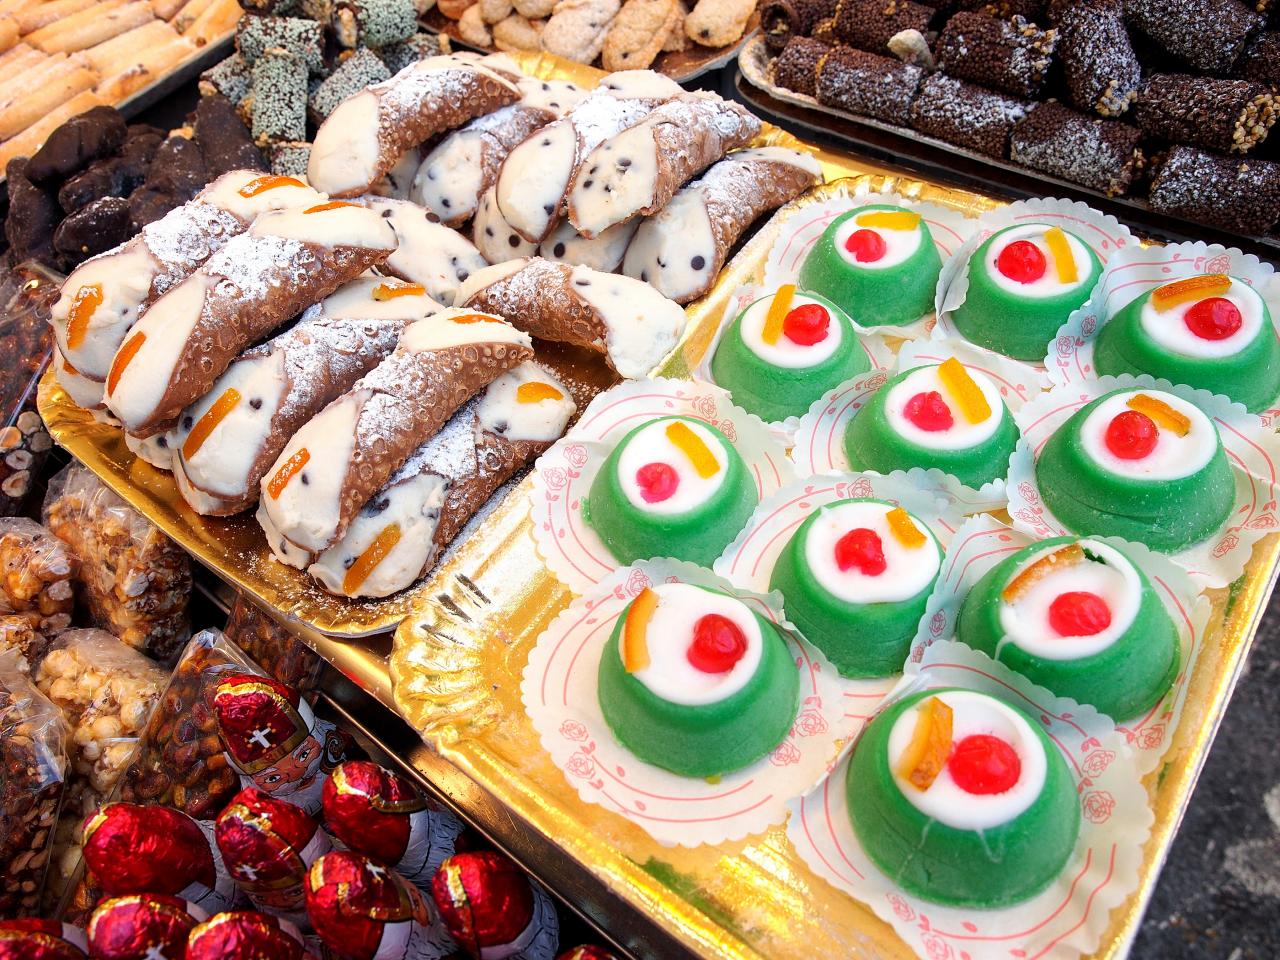 Sicilian Food: 30 Iconic Dishes + What to Eat in Sicily